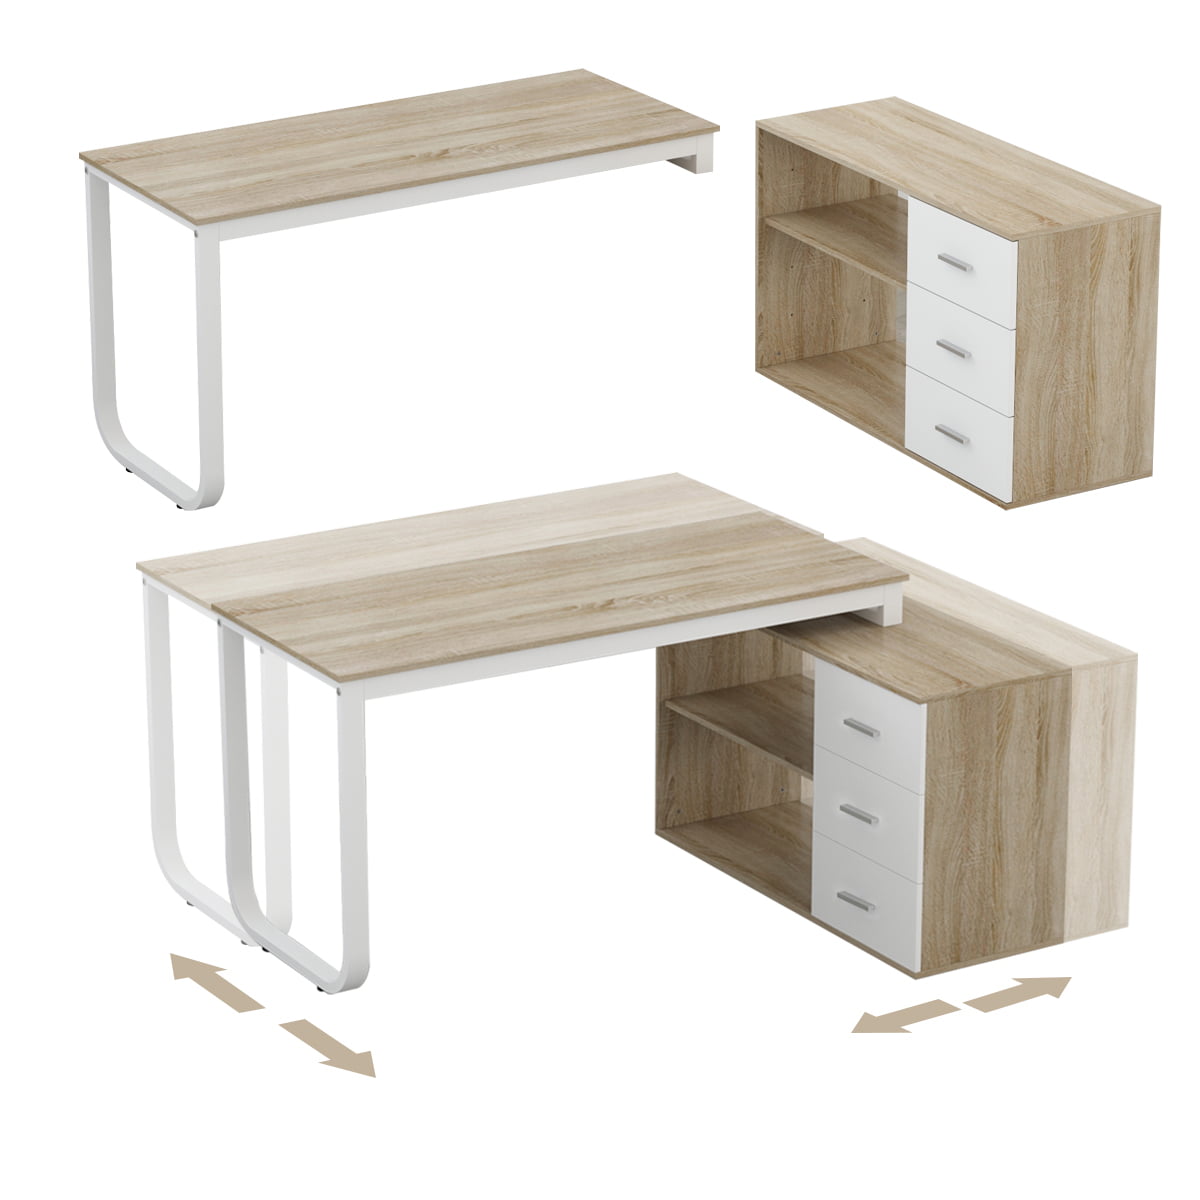 WiberWi Computer Desk with Drawers and Hutch, 43.3 inch White Home